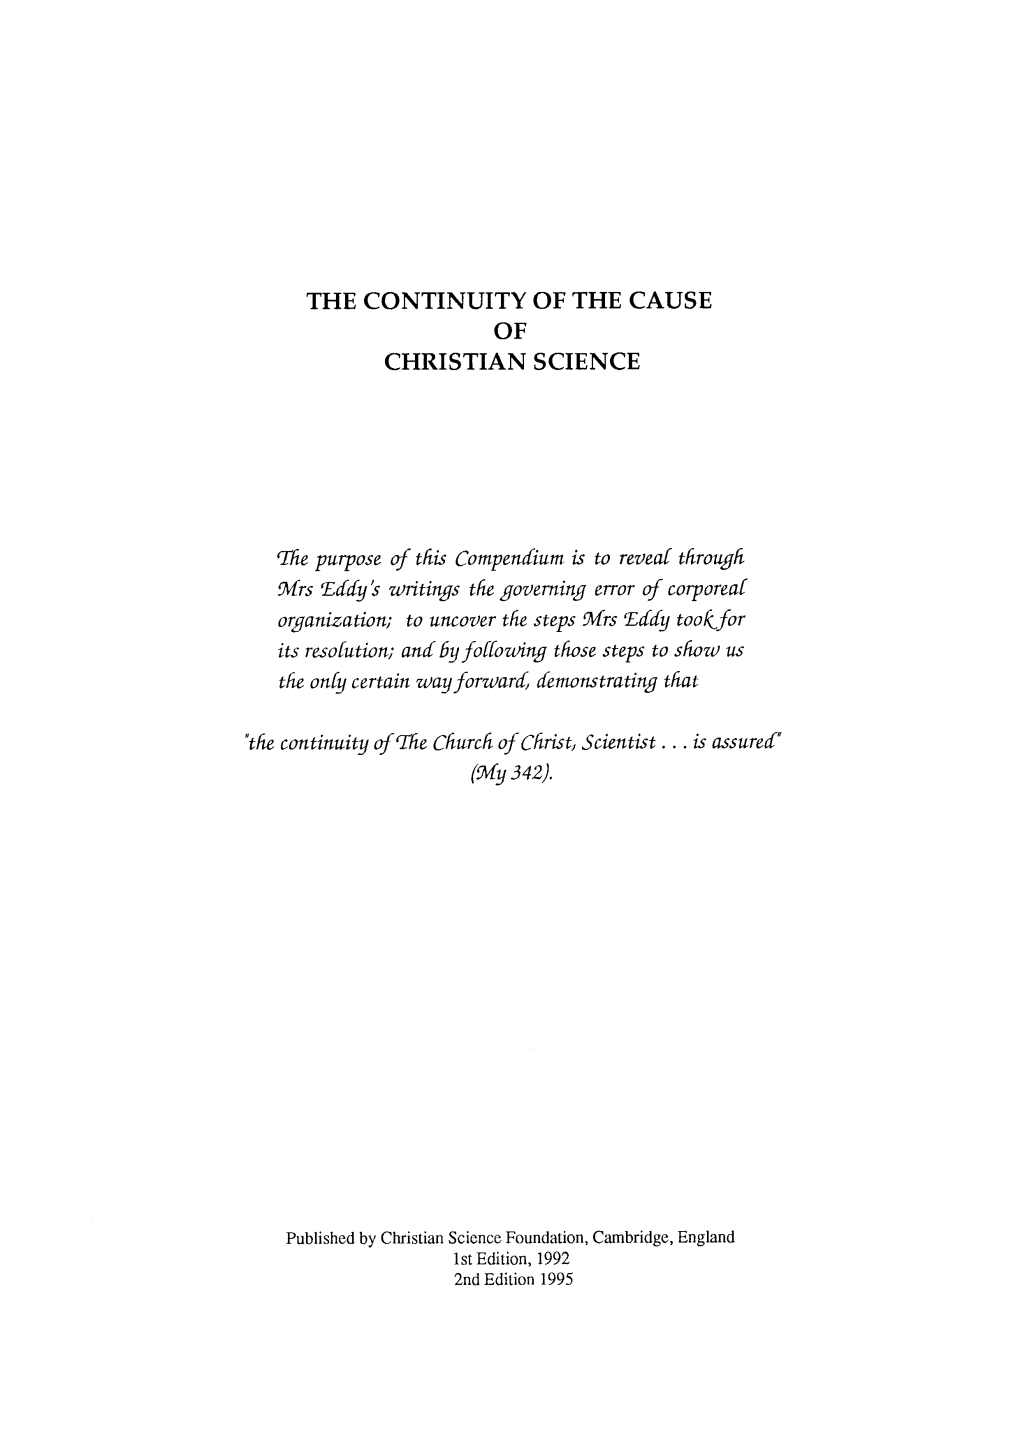 The Continuity of the Cause Christian Science